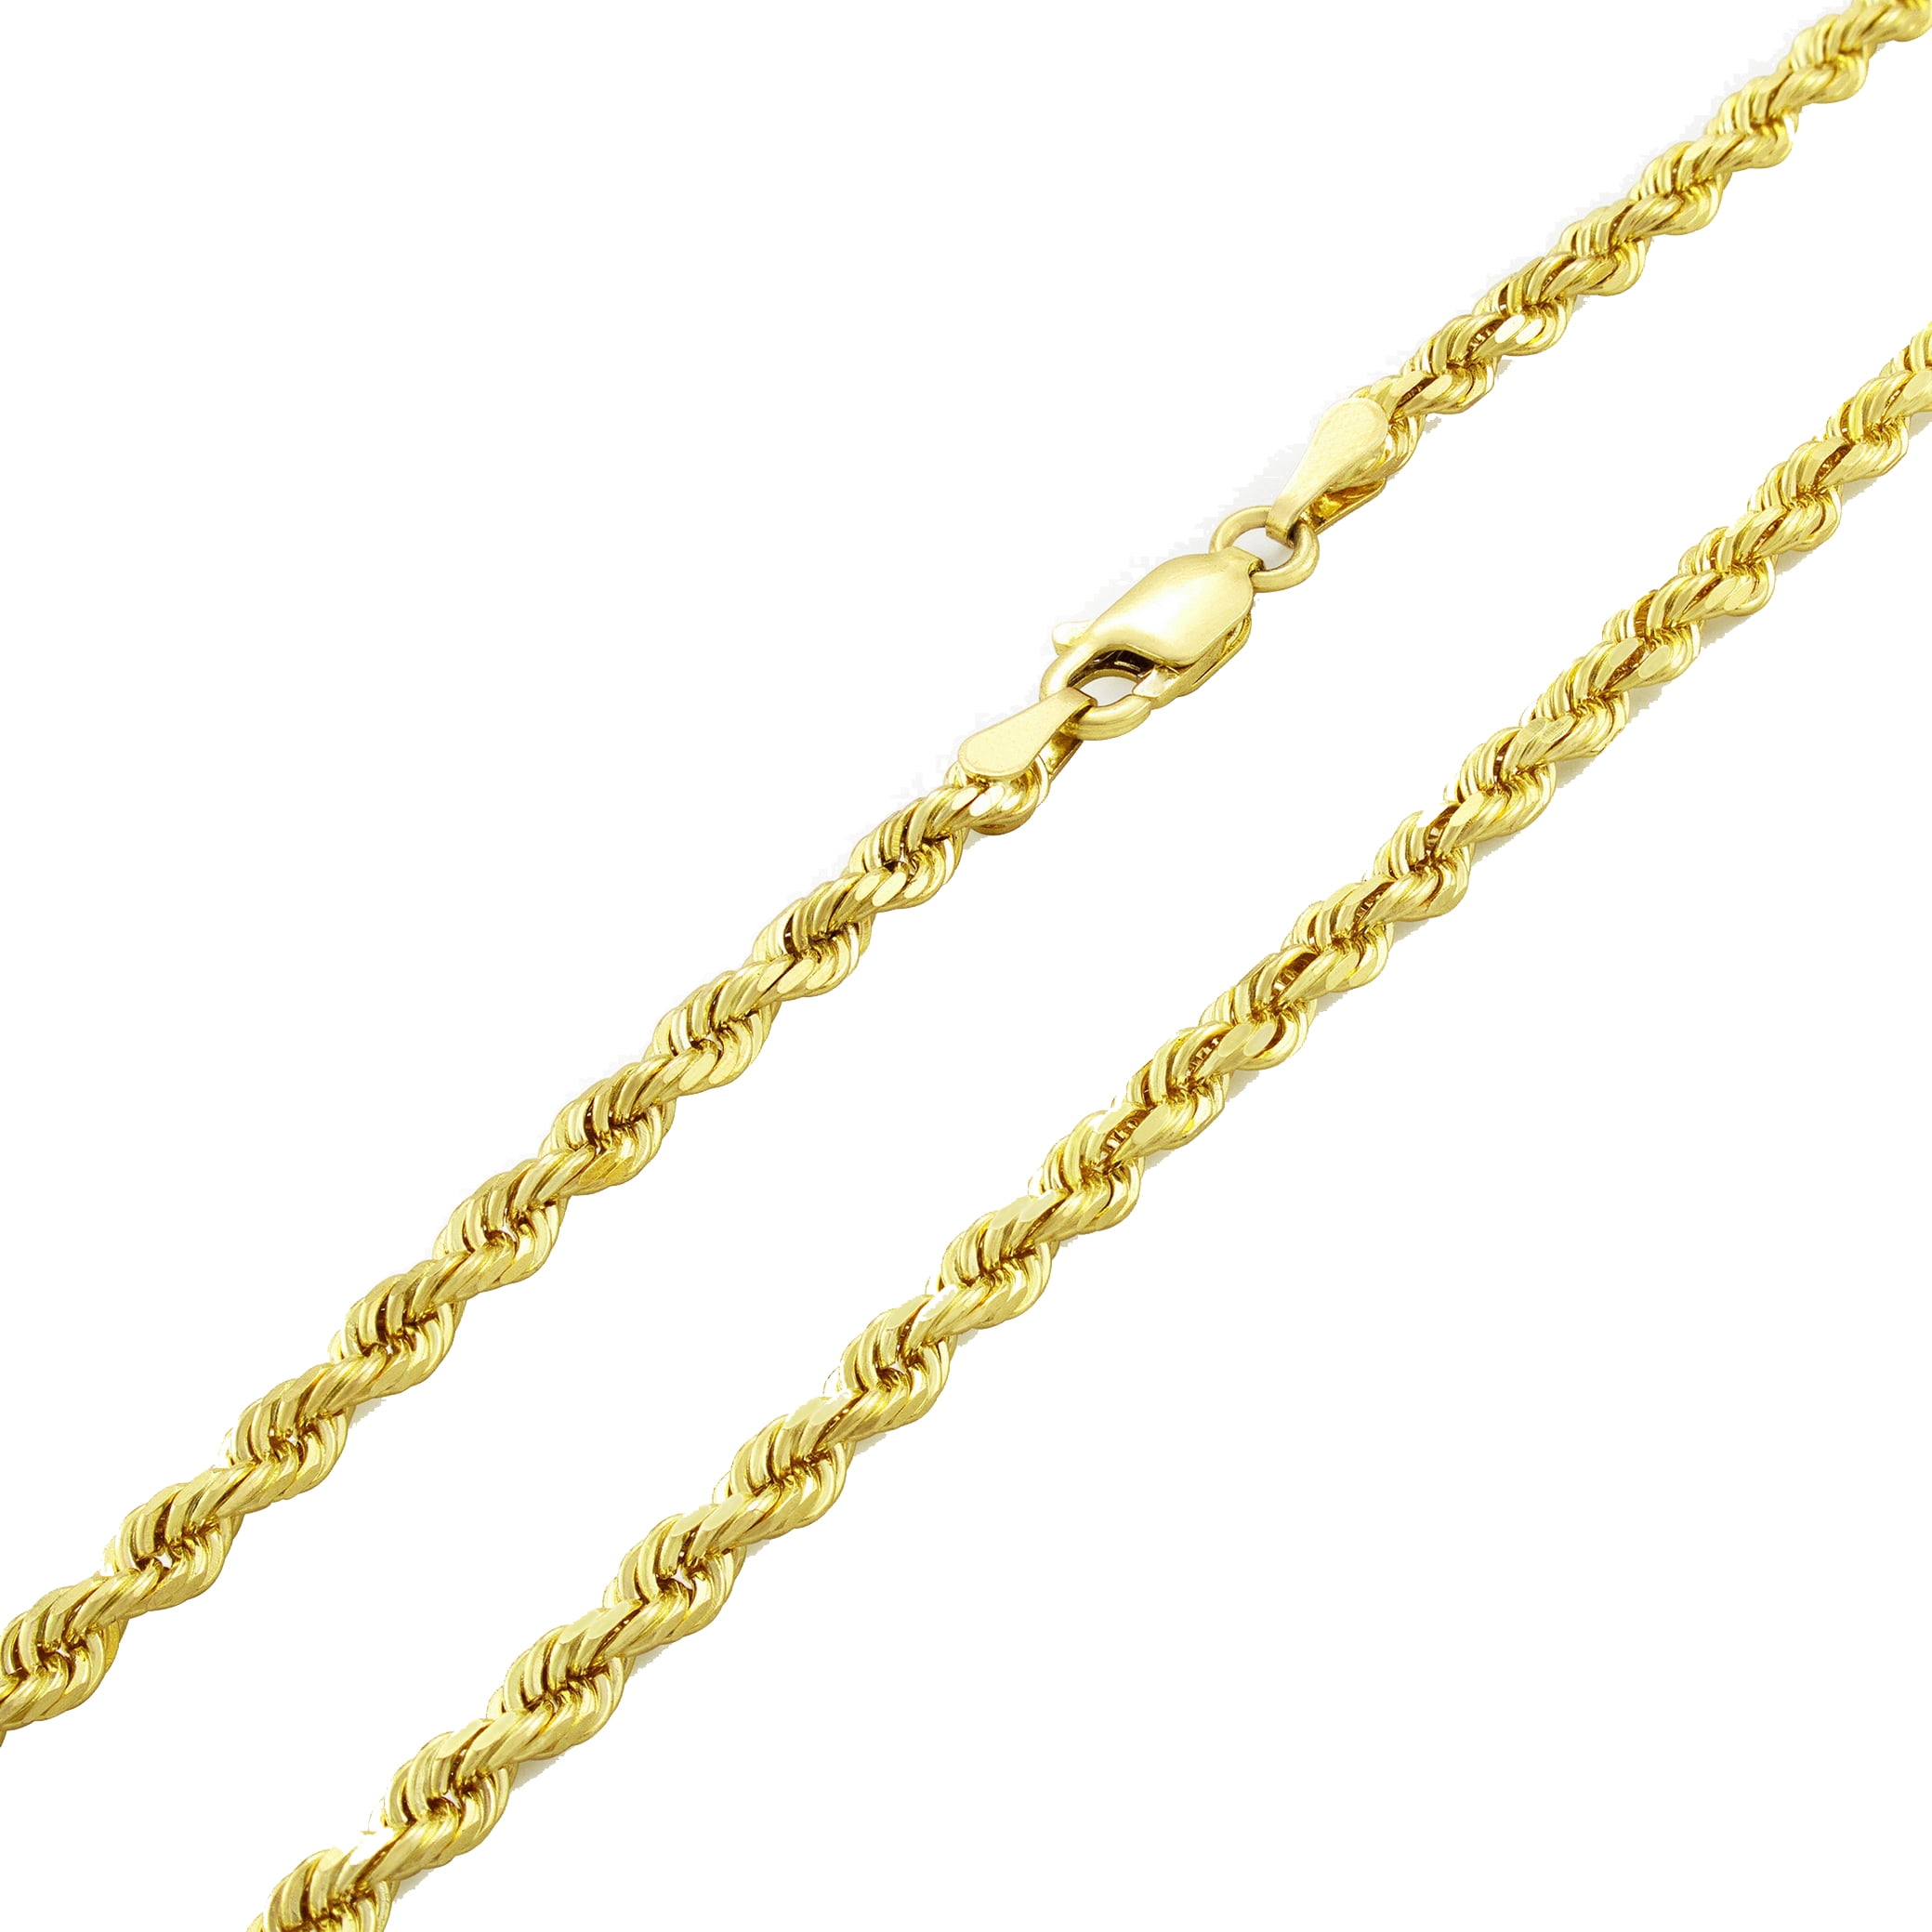 Nuragold 14k Yellow Gold 4mm Solid Rope Chain Diamond Cut Pendant Necklace,  Mens Jewelry with Lobster Clasp 18